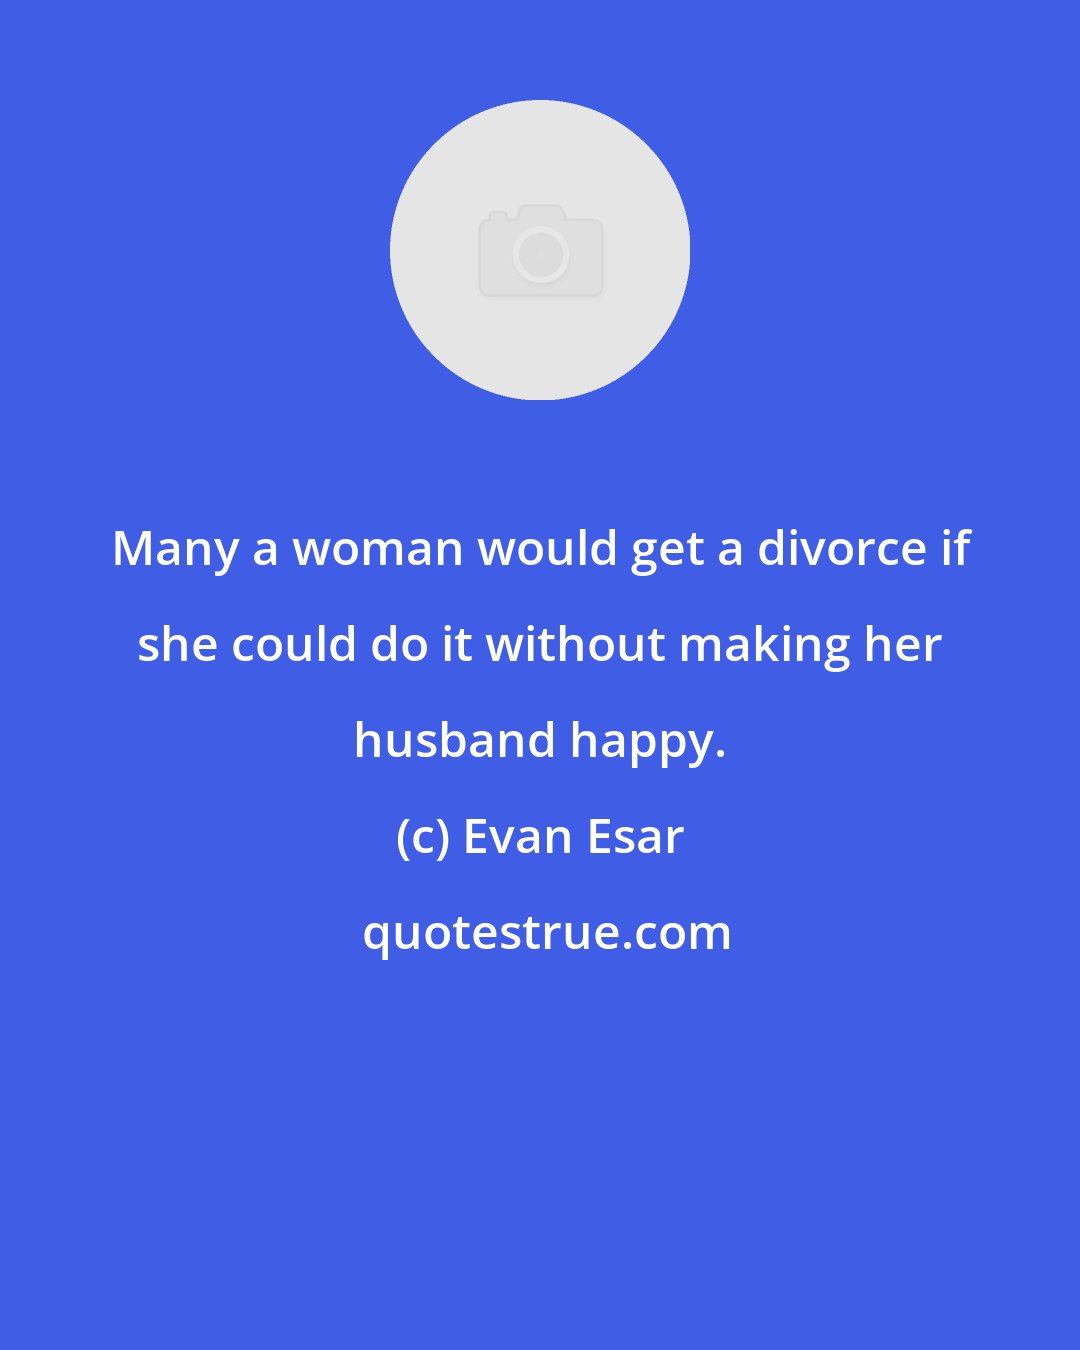 Evan Esar: Many a woman would get a divorce if she could do it without making her husband happy.